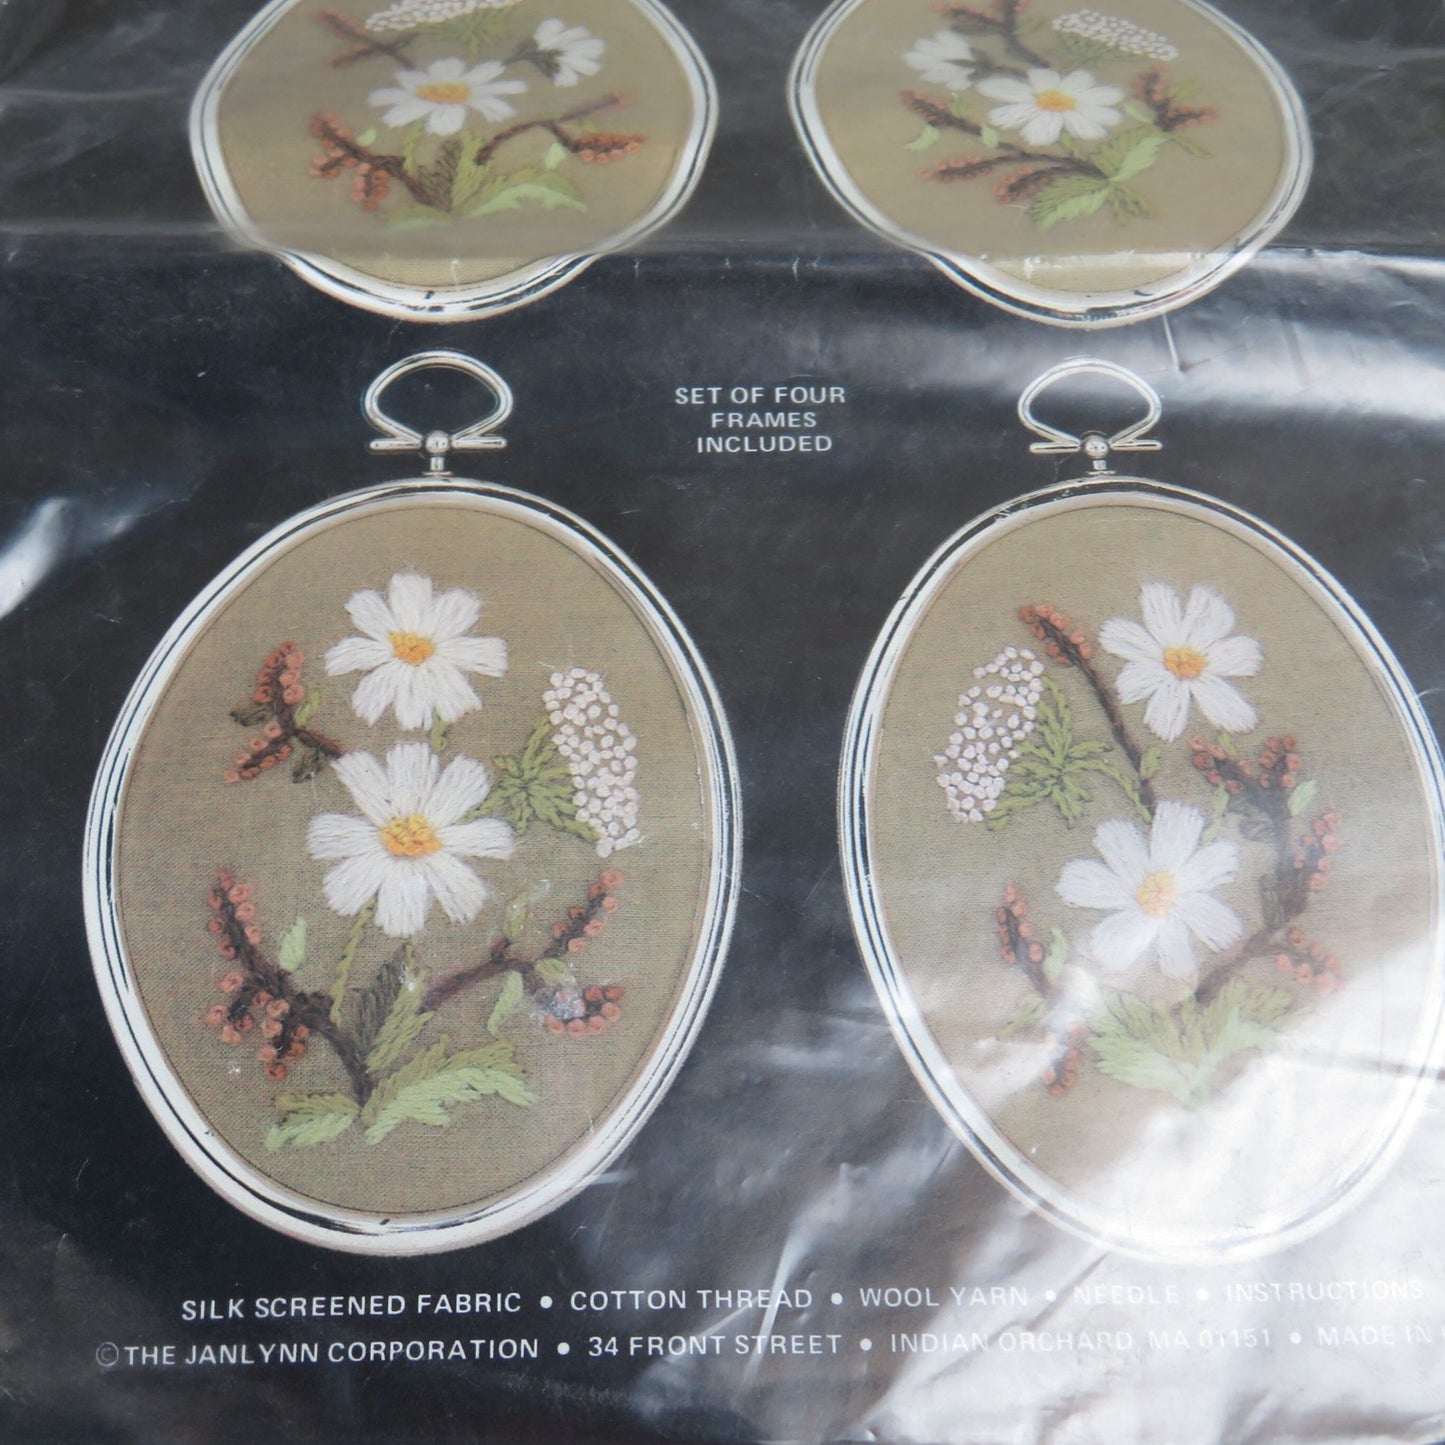 Queen Anne's Lace and Daisies Embroidery Kit Janlynn Frames Flowers Floral 00-53 Set of 4